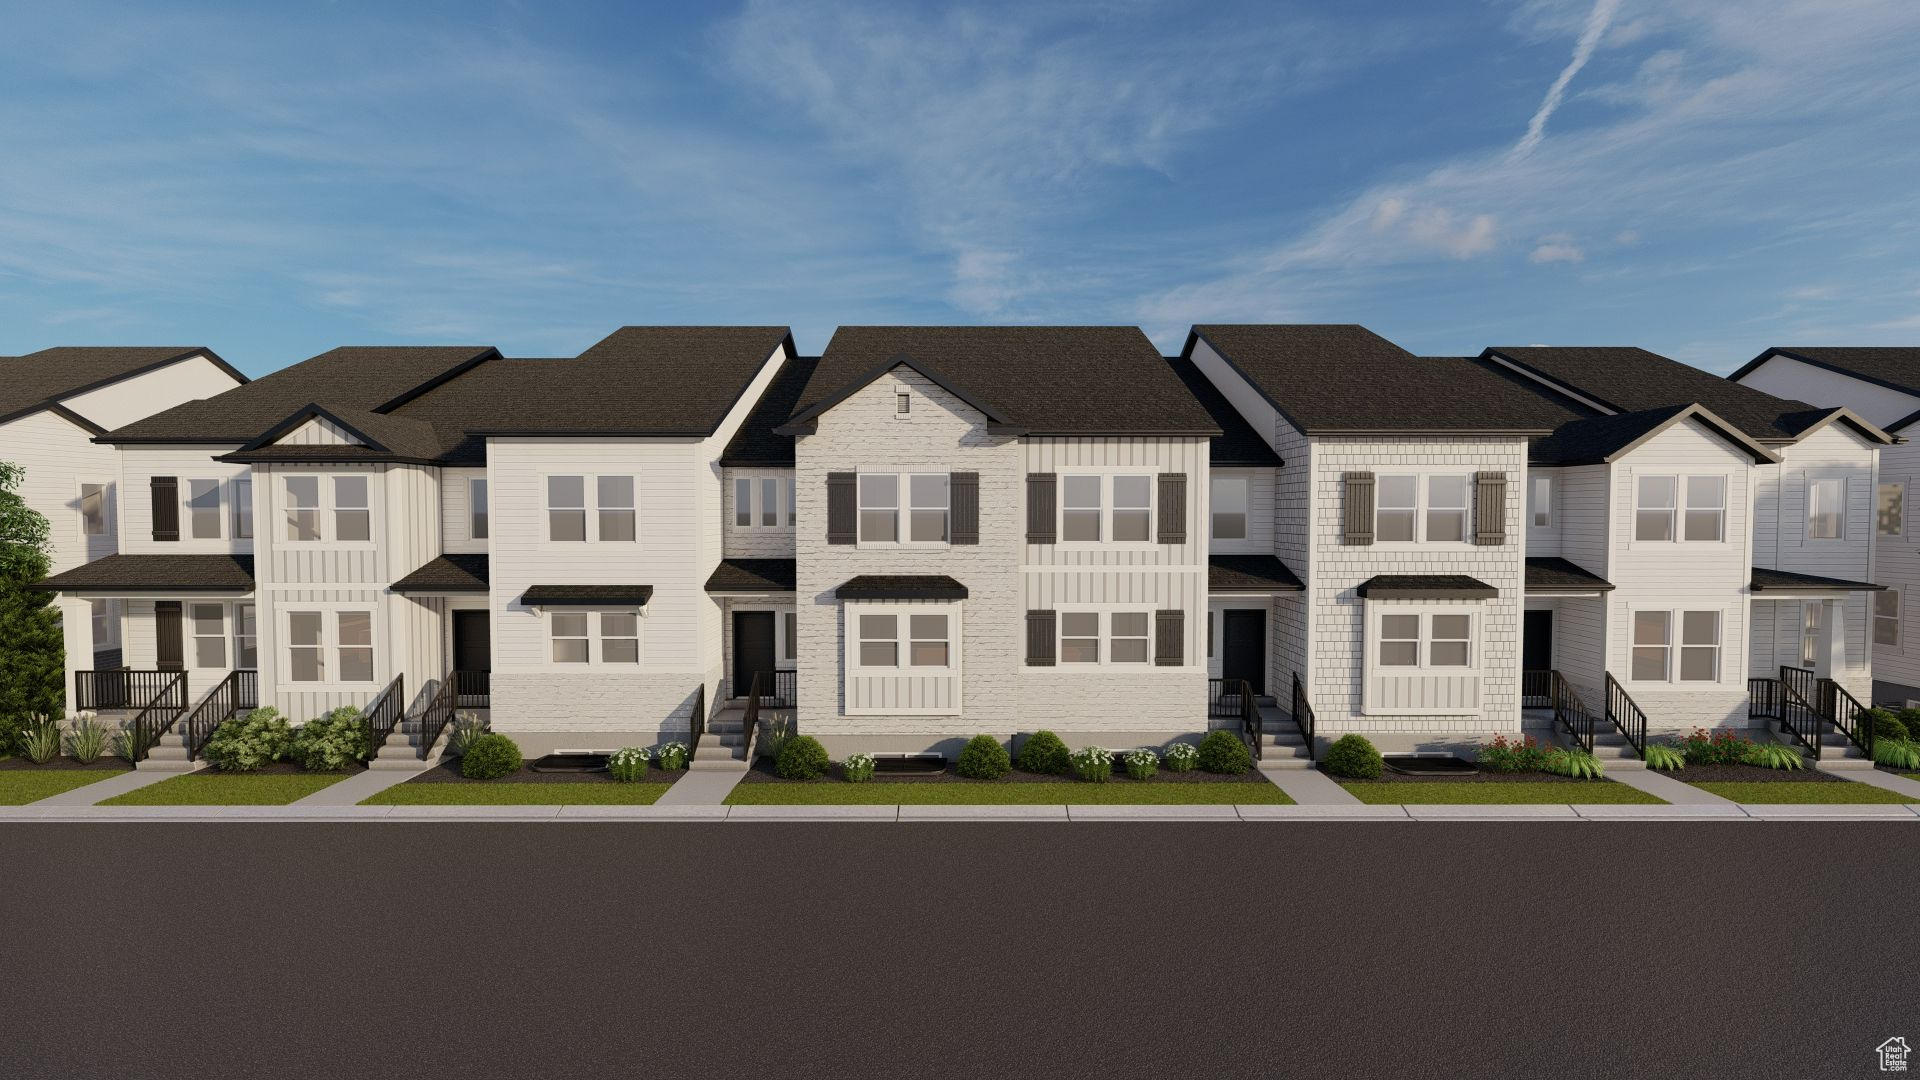 View of townhome / multi-family property